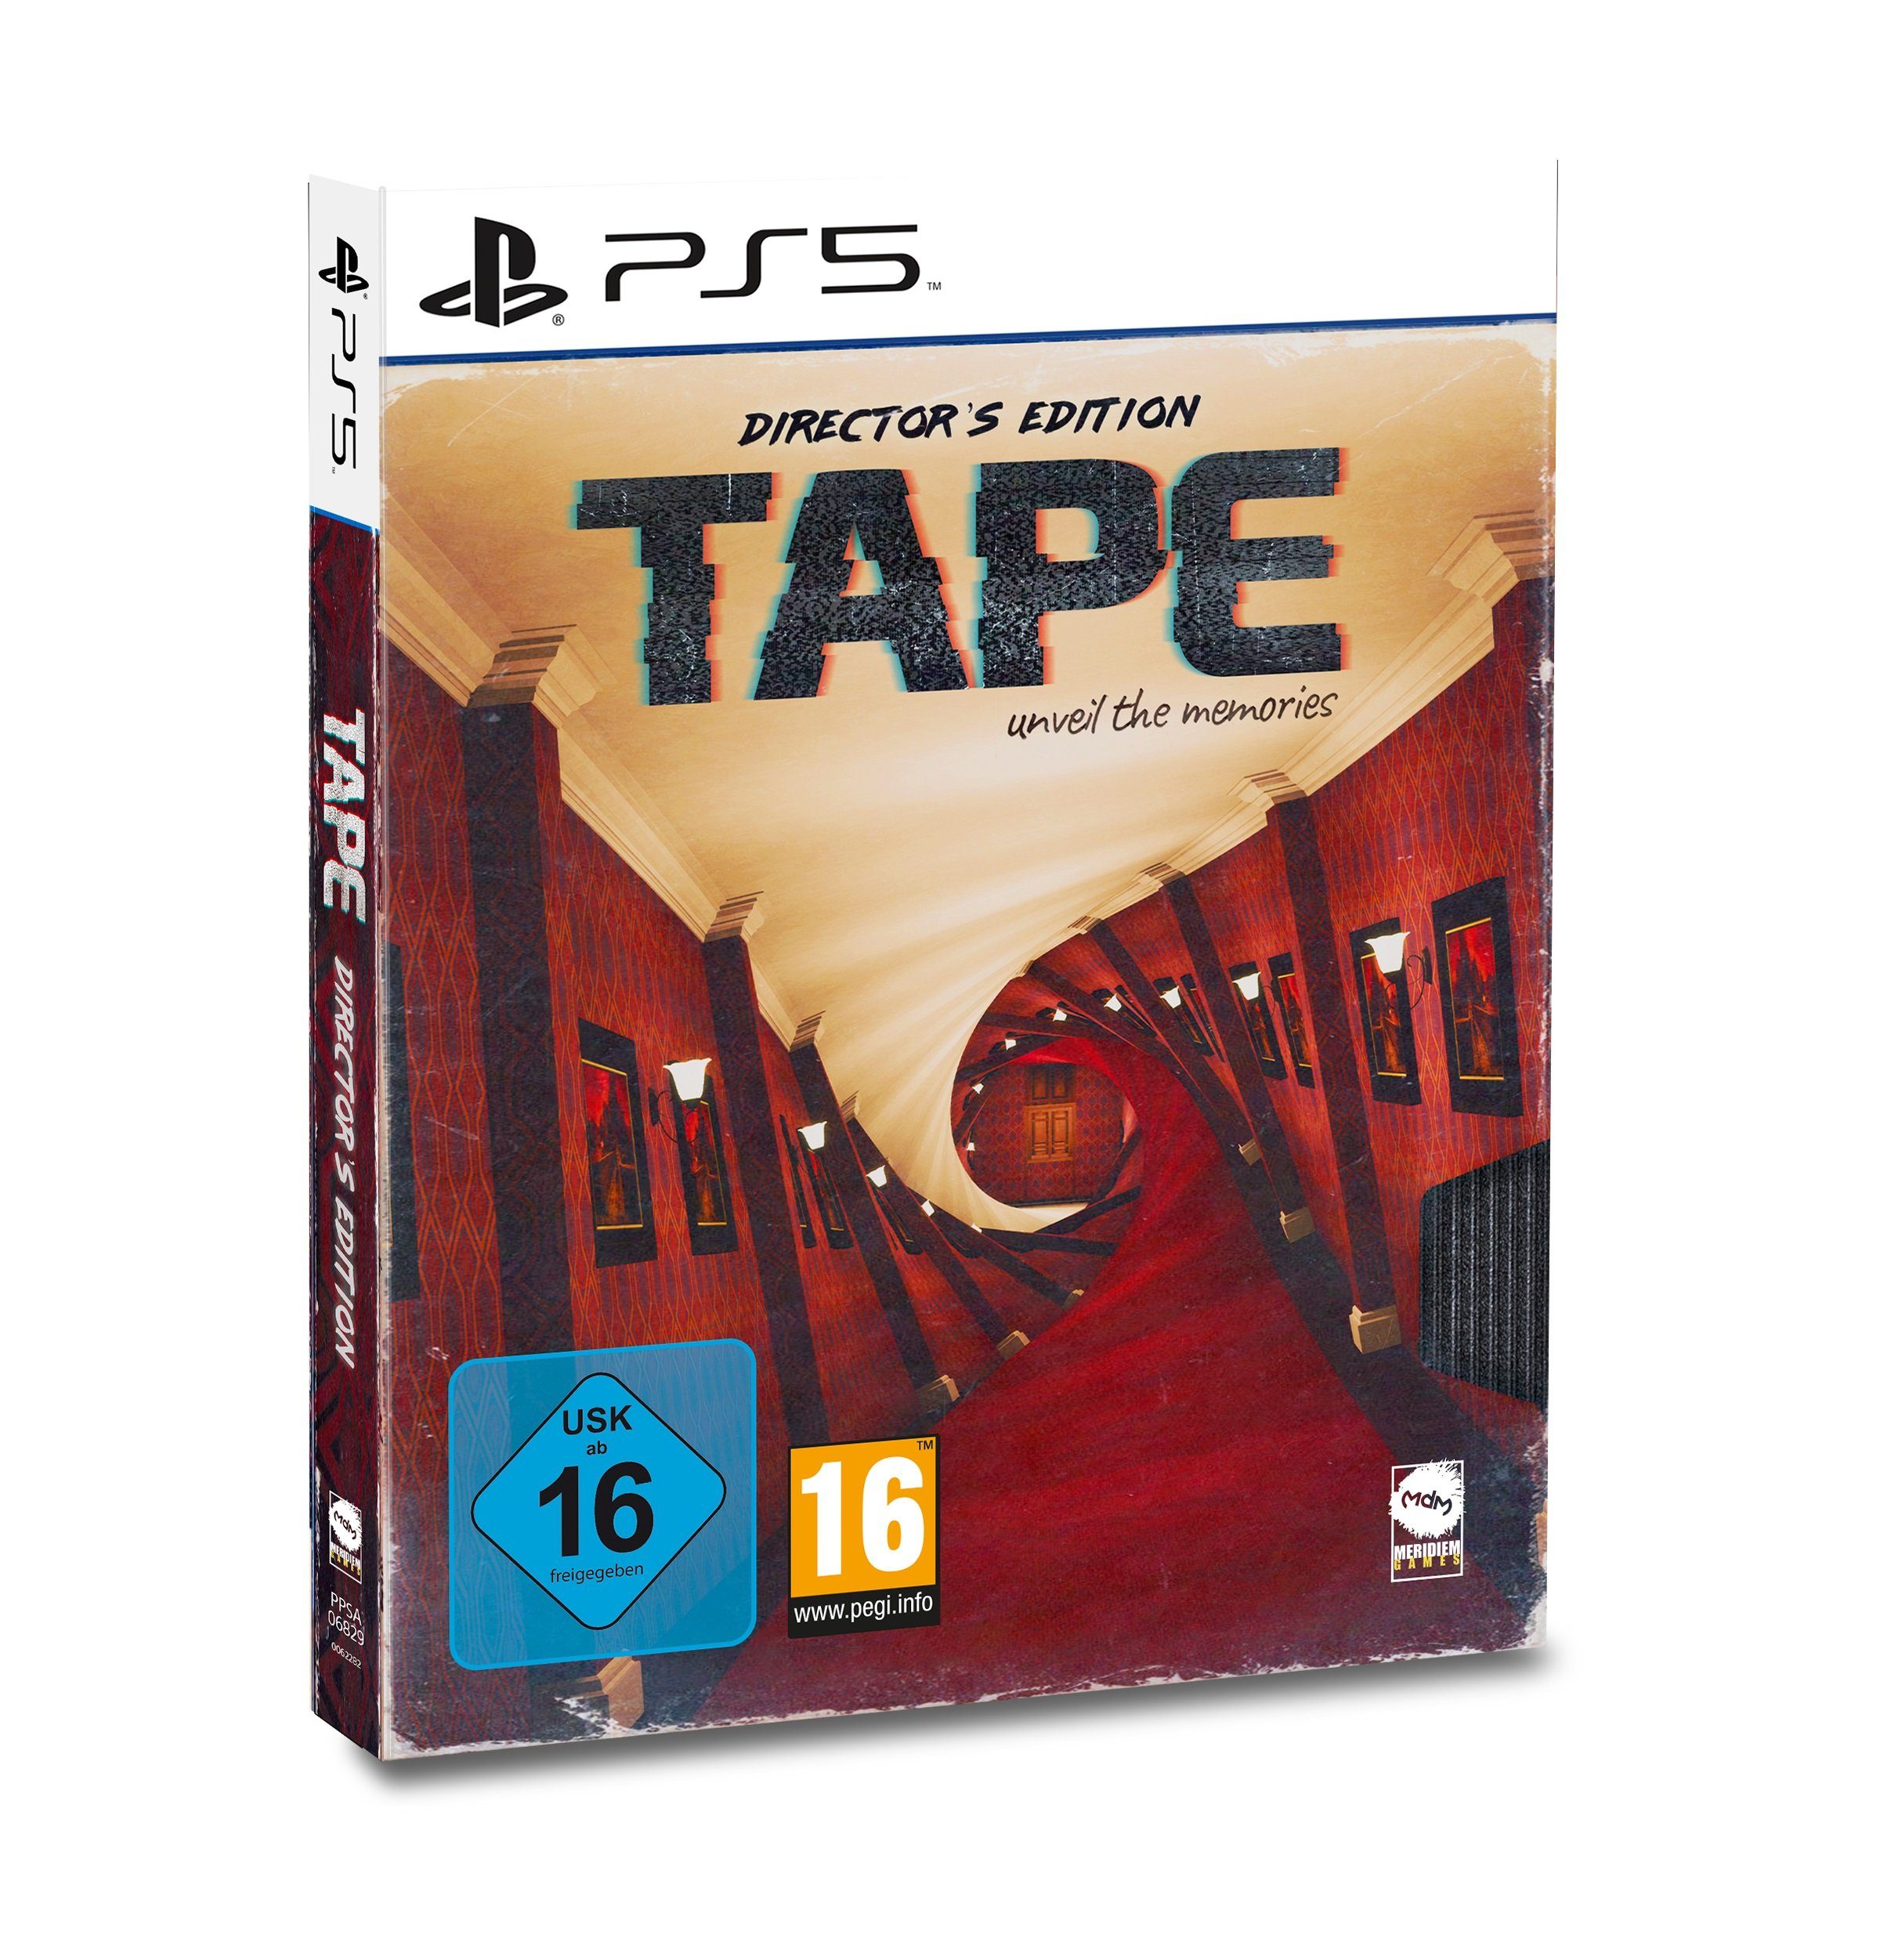 5 TAPE: the Edition Memories Unveil PlayStation Directors